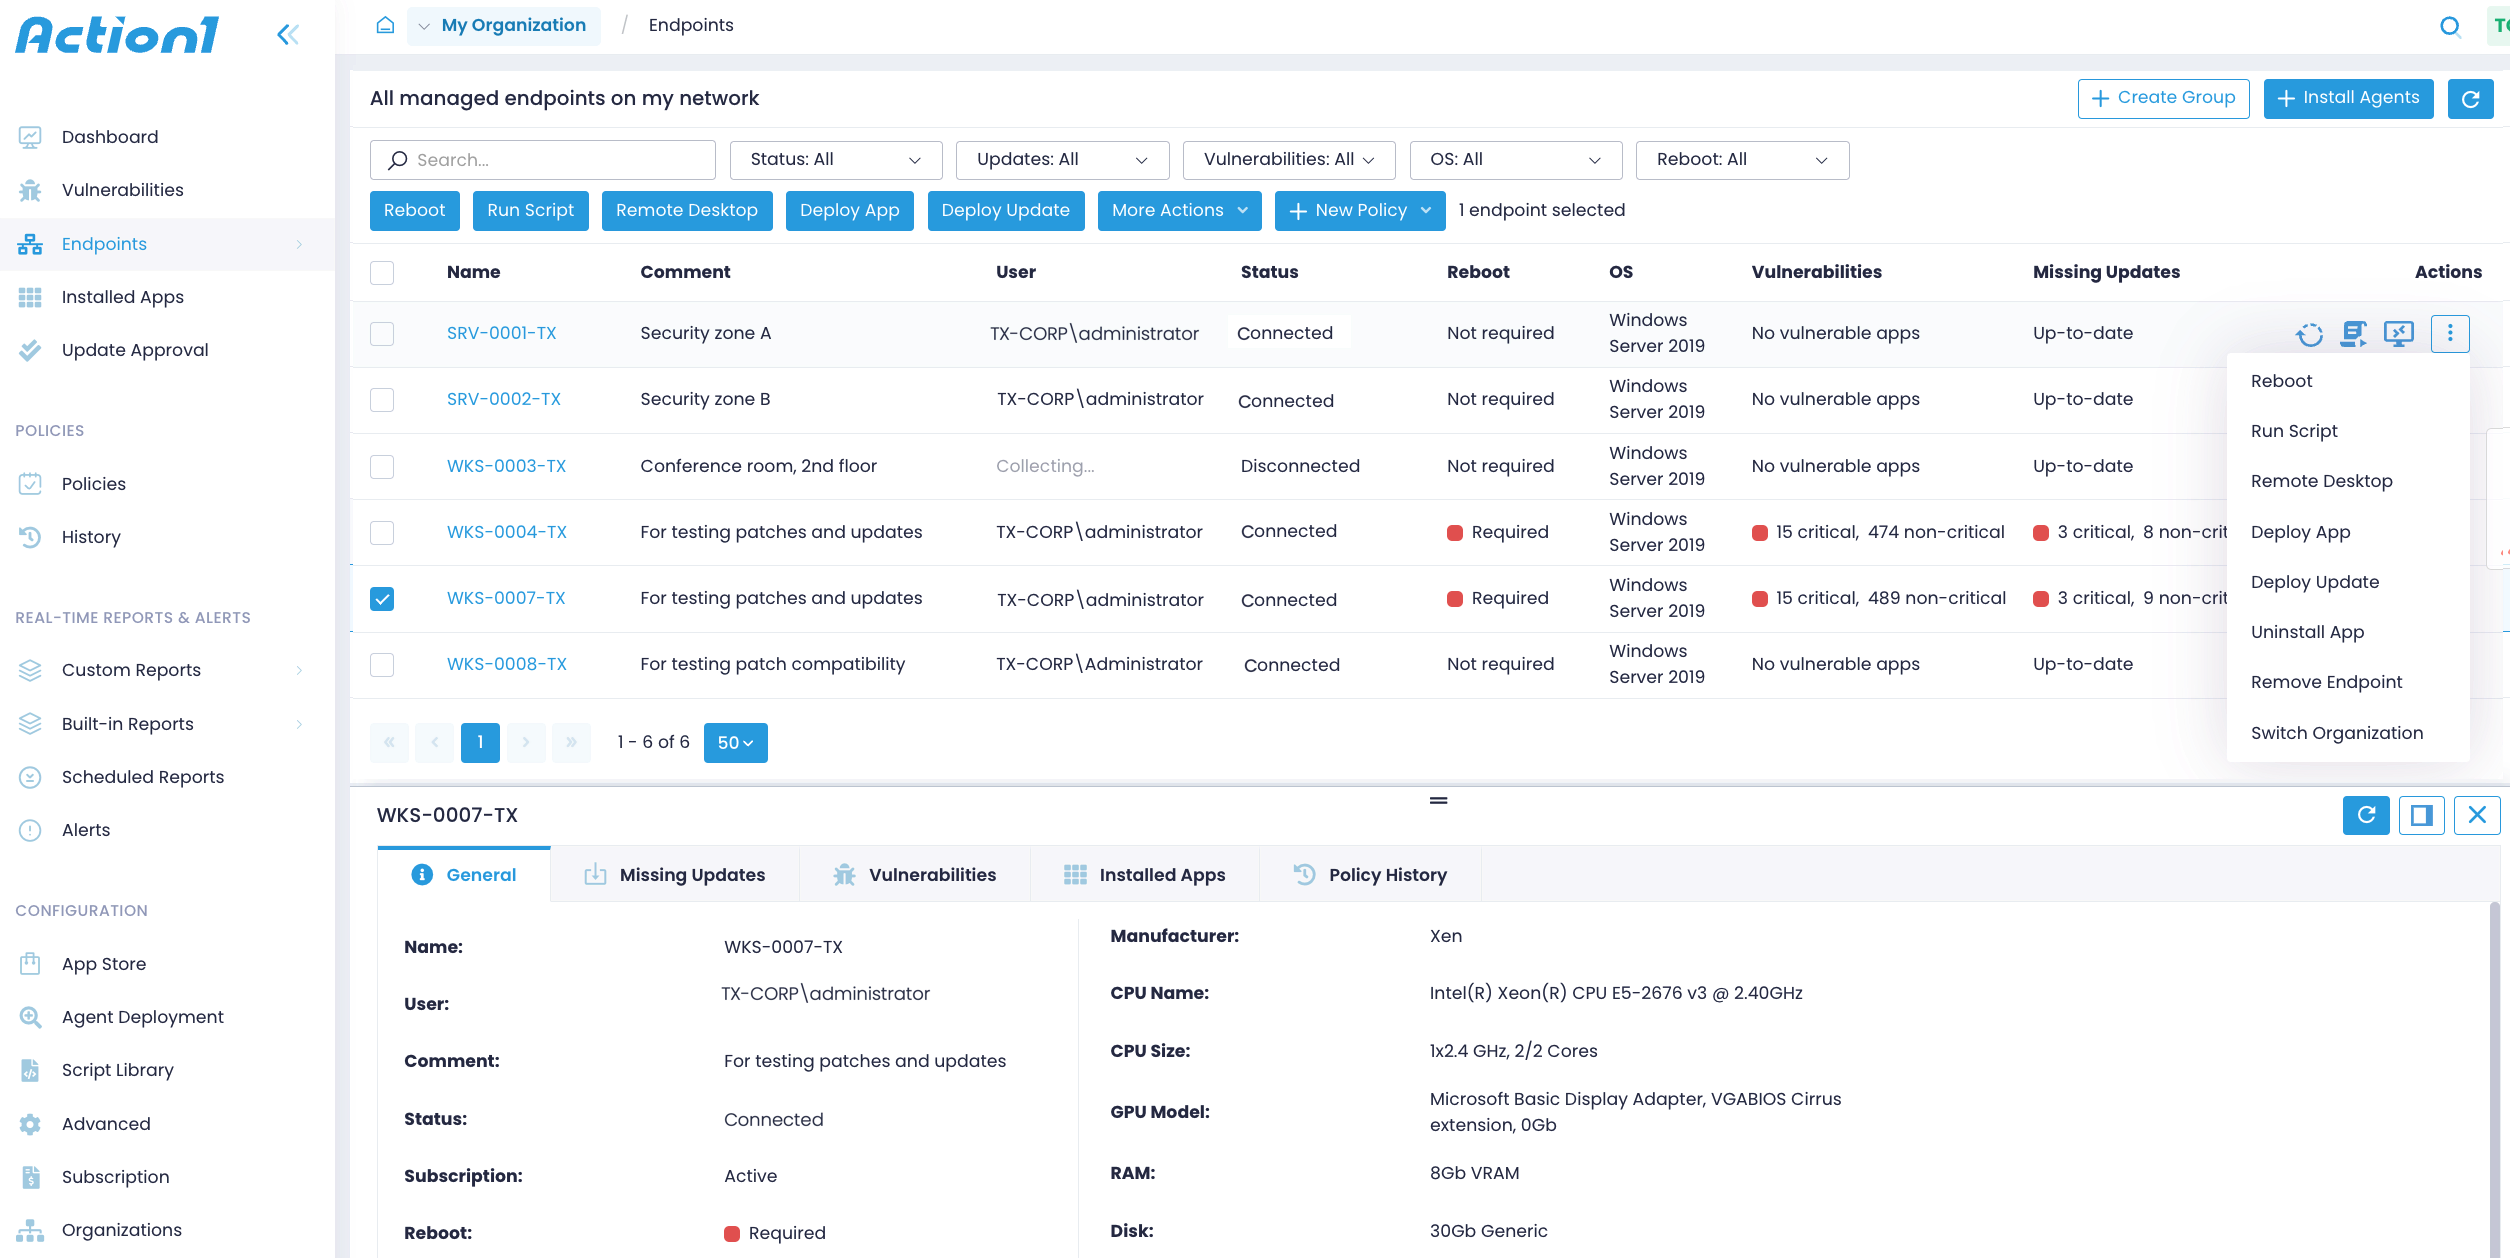 Managed endpoints dashboard with expanded General tab